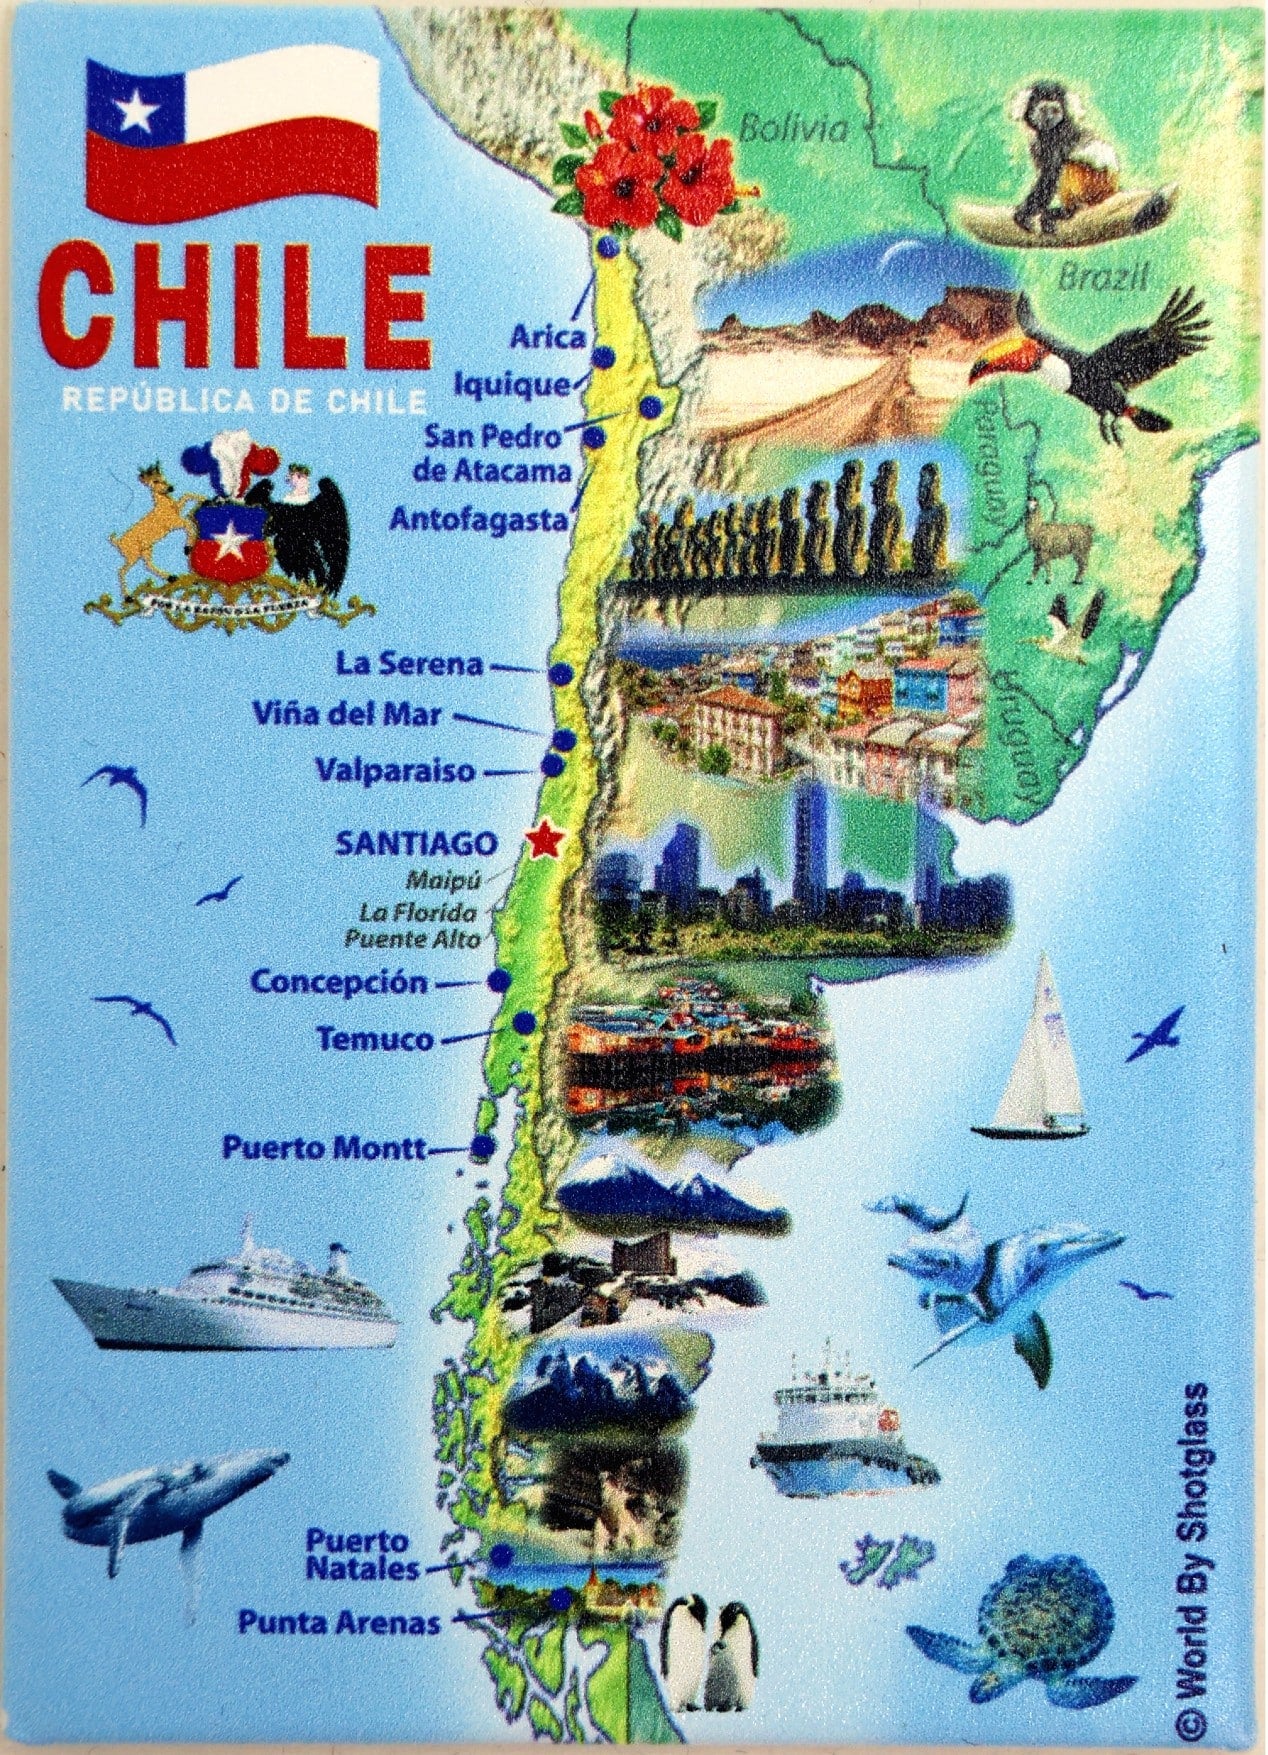 Chile Graphic Map and Attractions Souvenir Fridge Magnet 2.5" X 3.5"